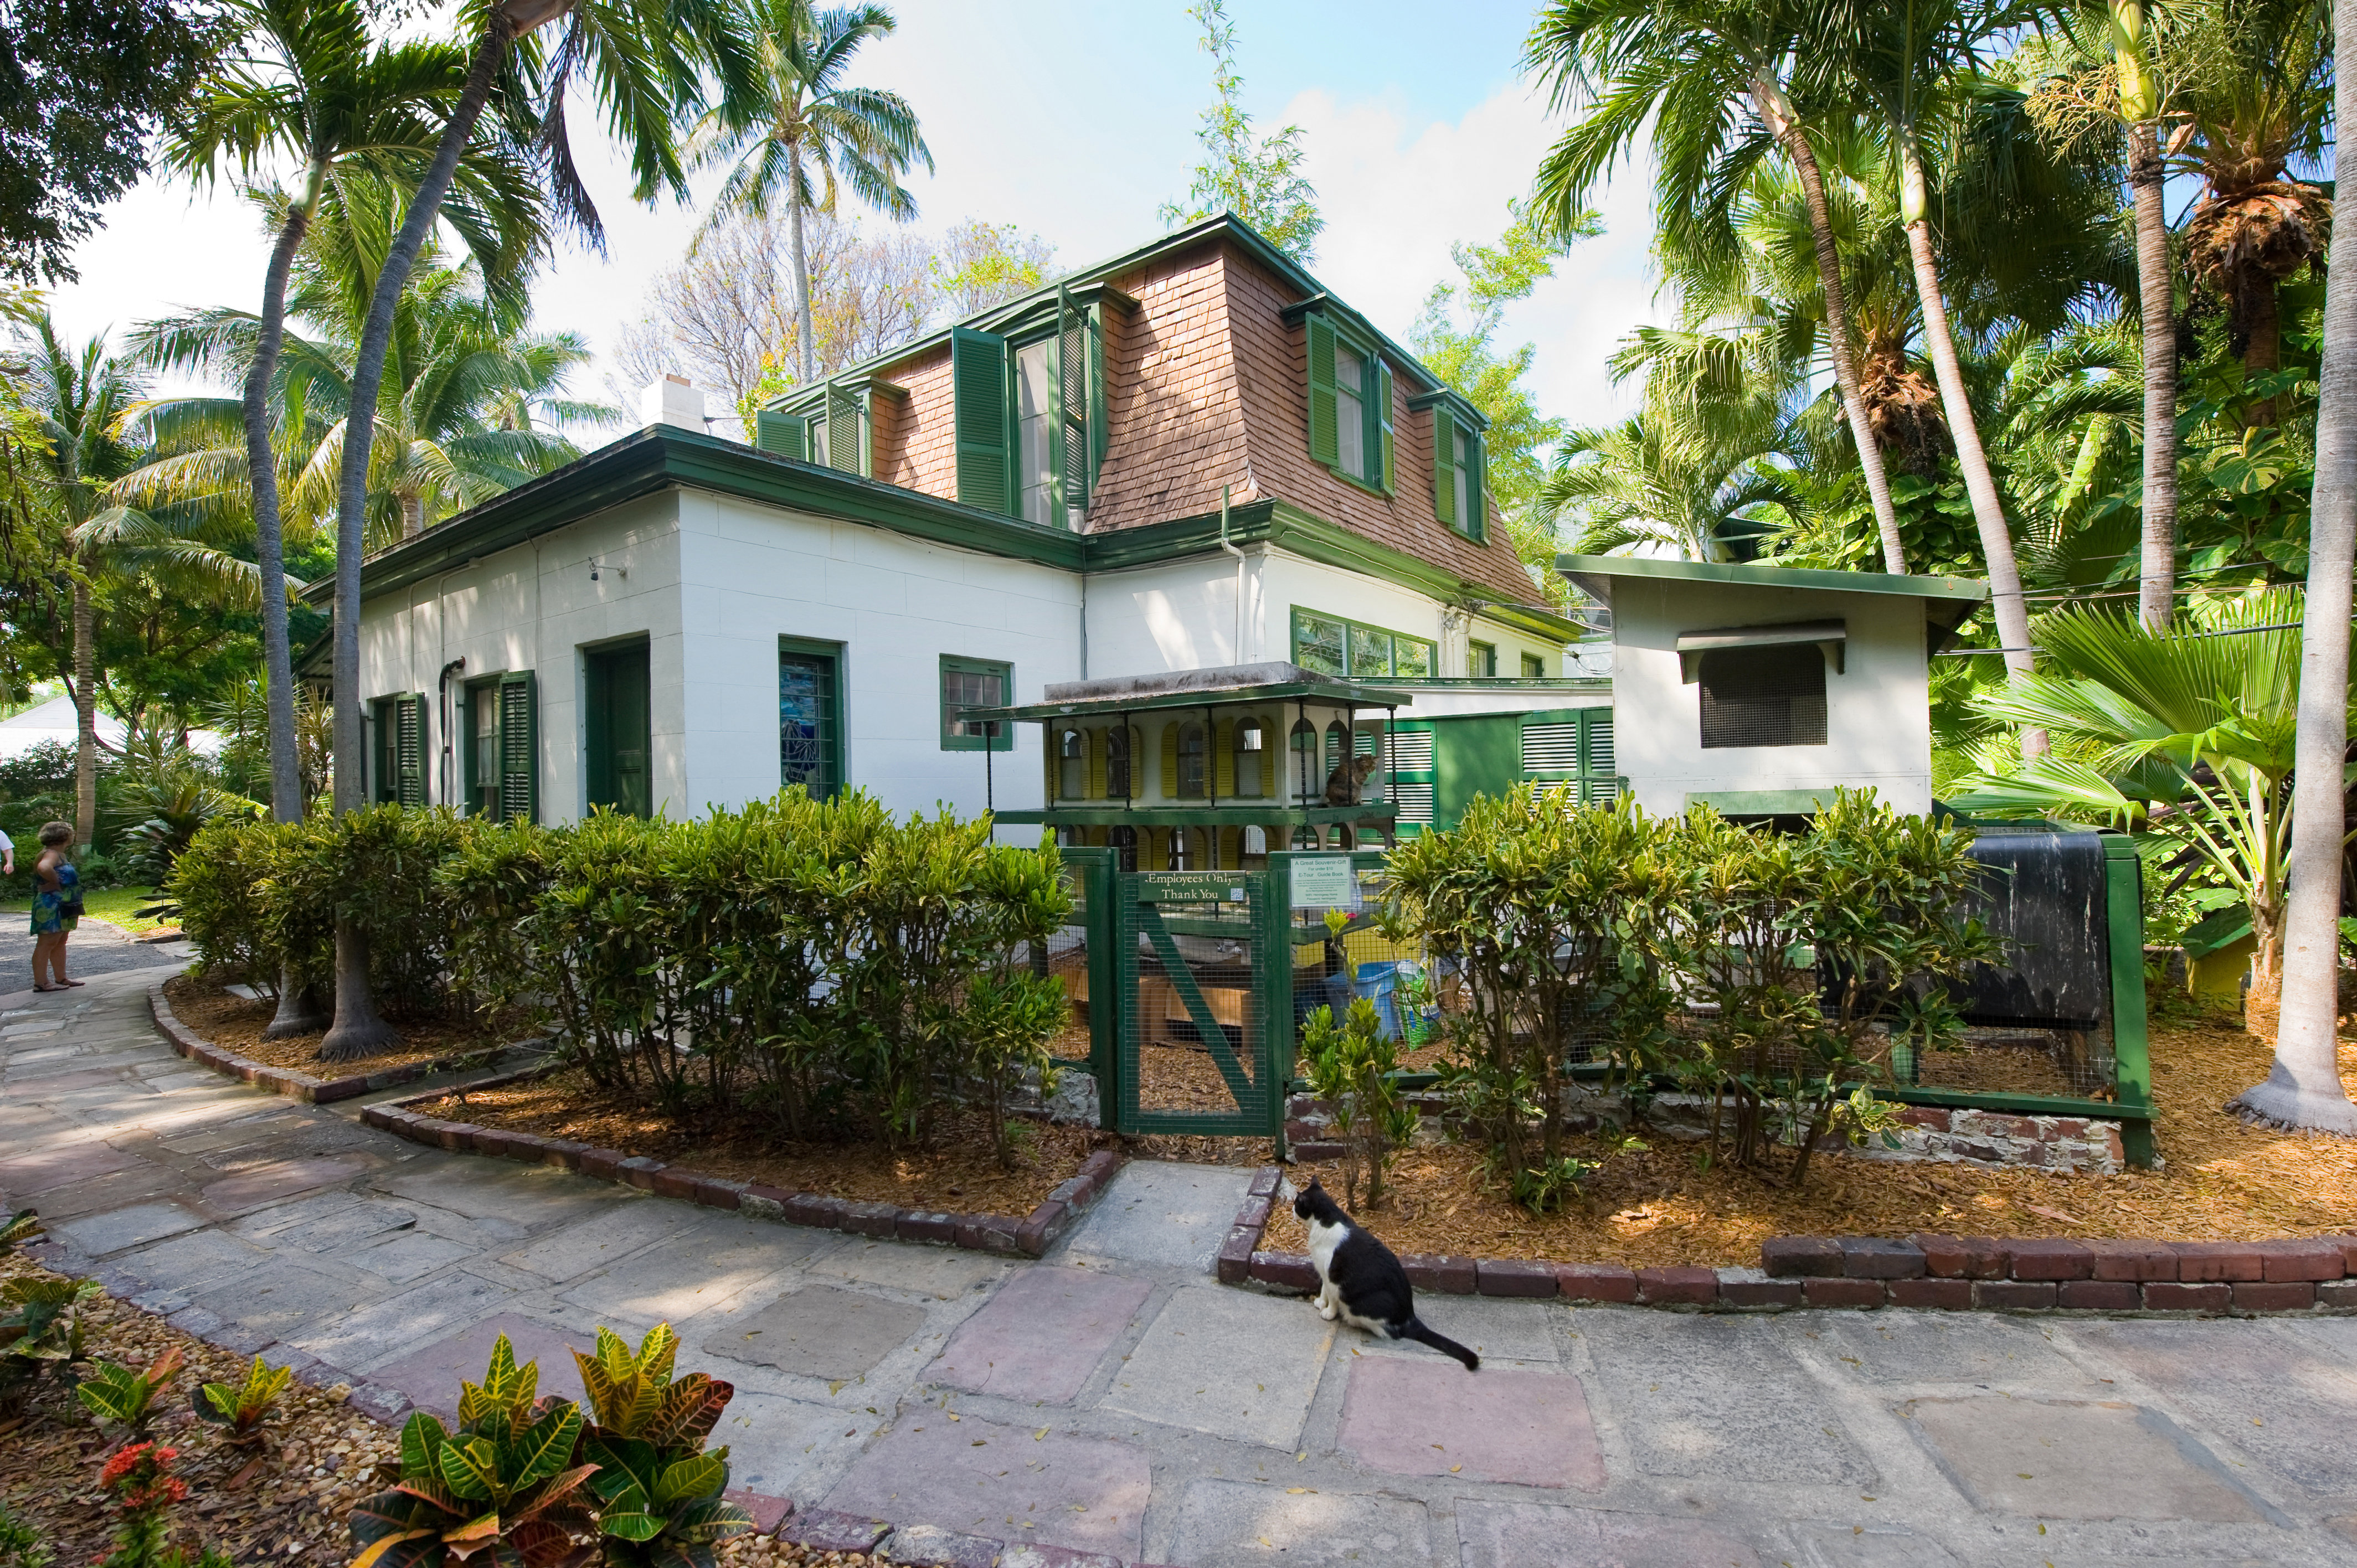 Best Things to Do in Florida Keys - Ernest Hemingway House and Museum